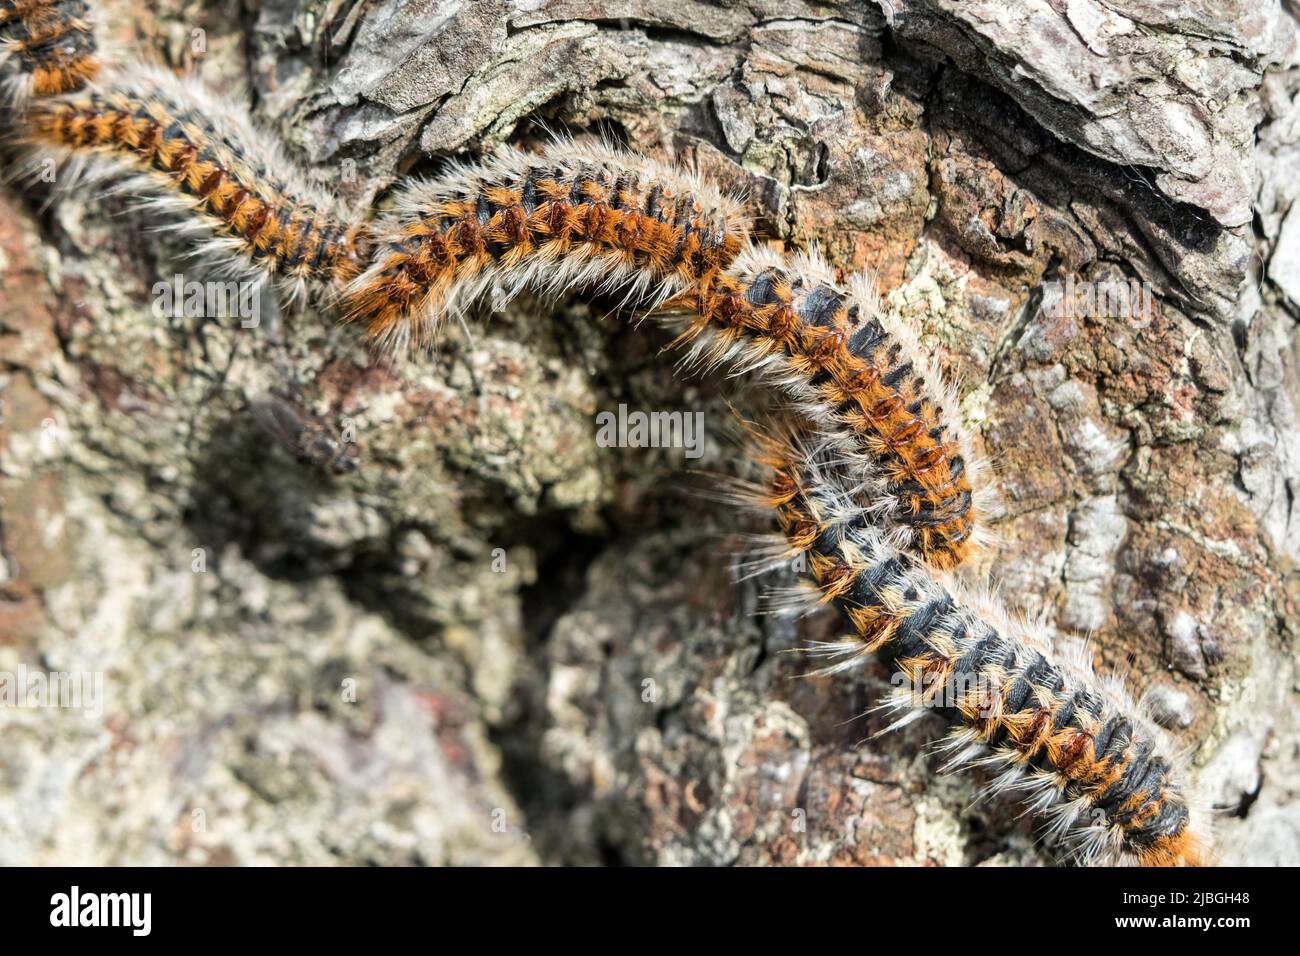 Pine Processionary Moth Caterpillars (Thaumetopoea pityocampa), Brittany, France Stock Photo